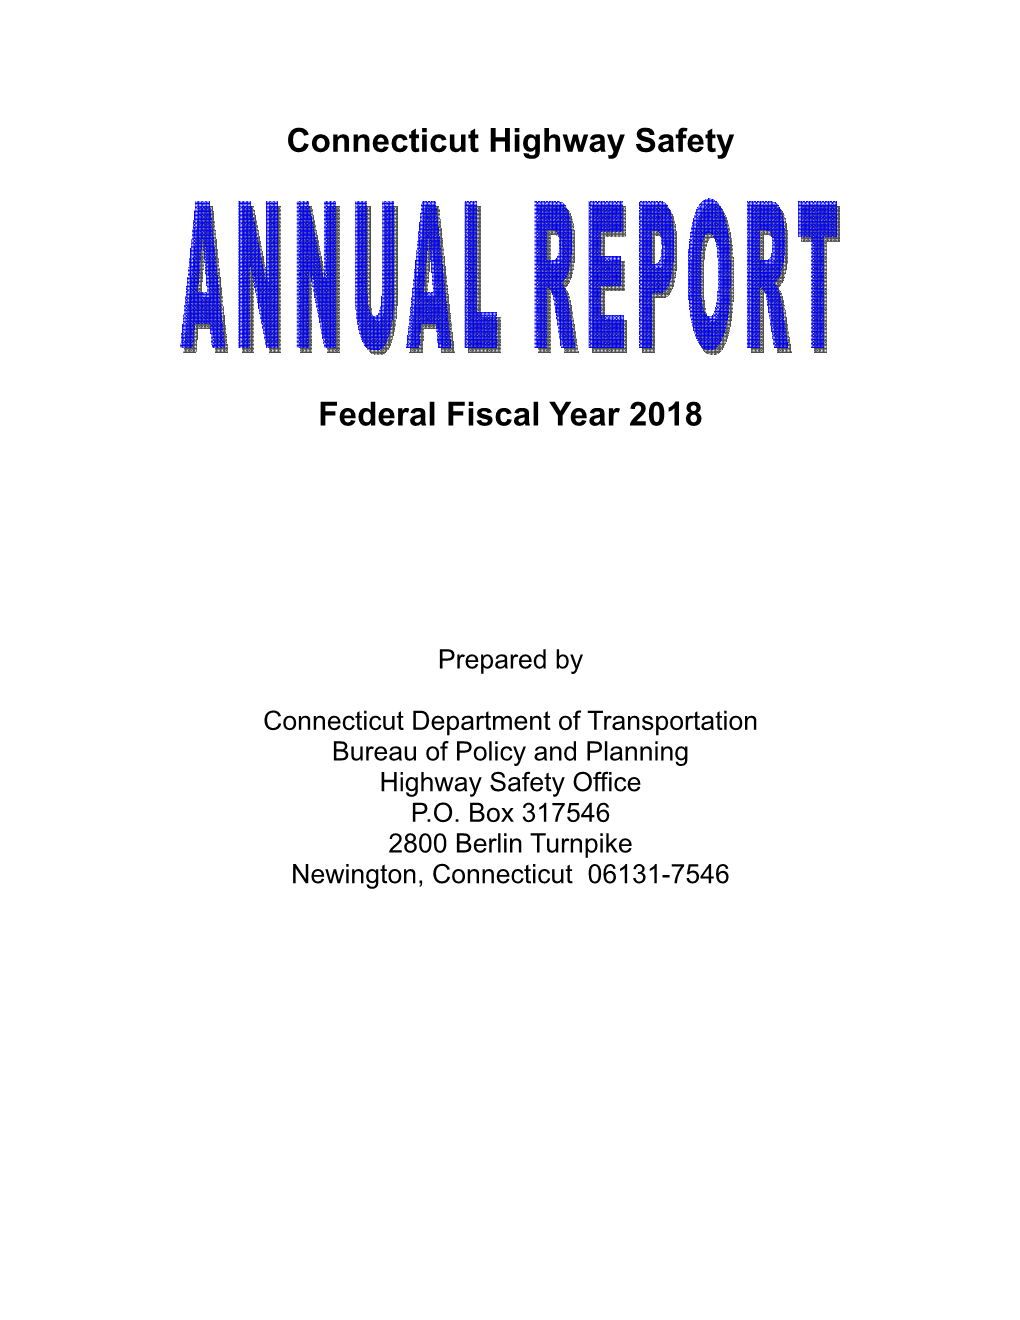 Connecticut Highway Safety Federal Fiscal Year 2018